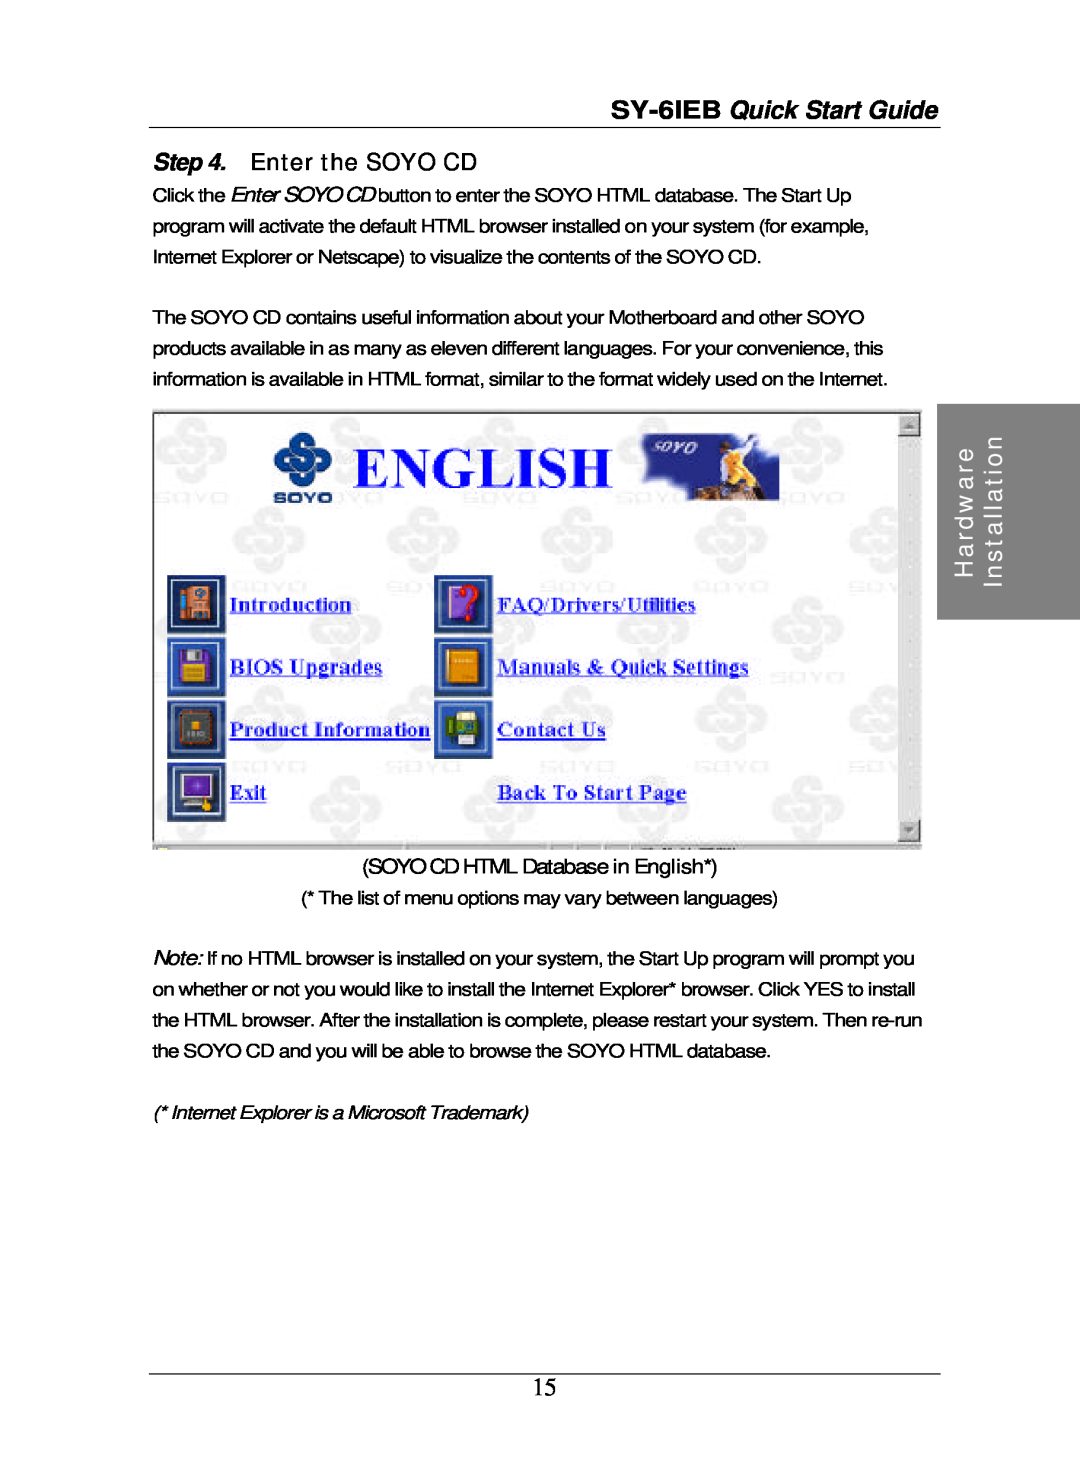 SOYO quick start Enter the SOYO CD, SOYO CD HTML Database in English, SY-6IEB Quick Start Guide, Hardware, Installation 